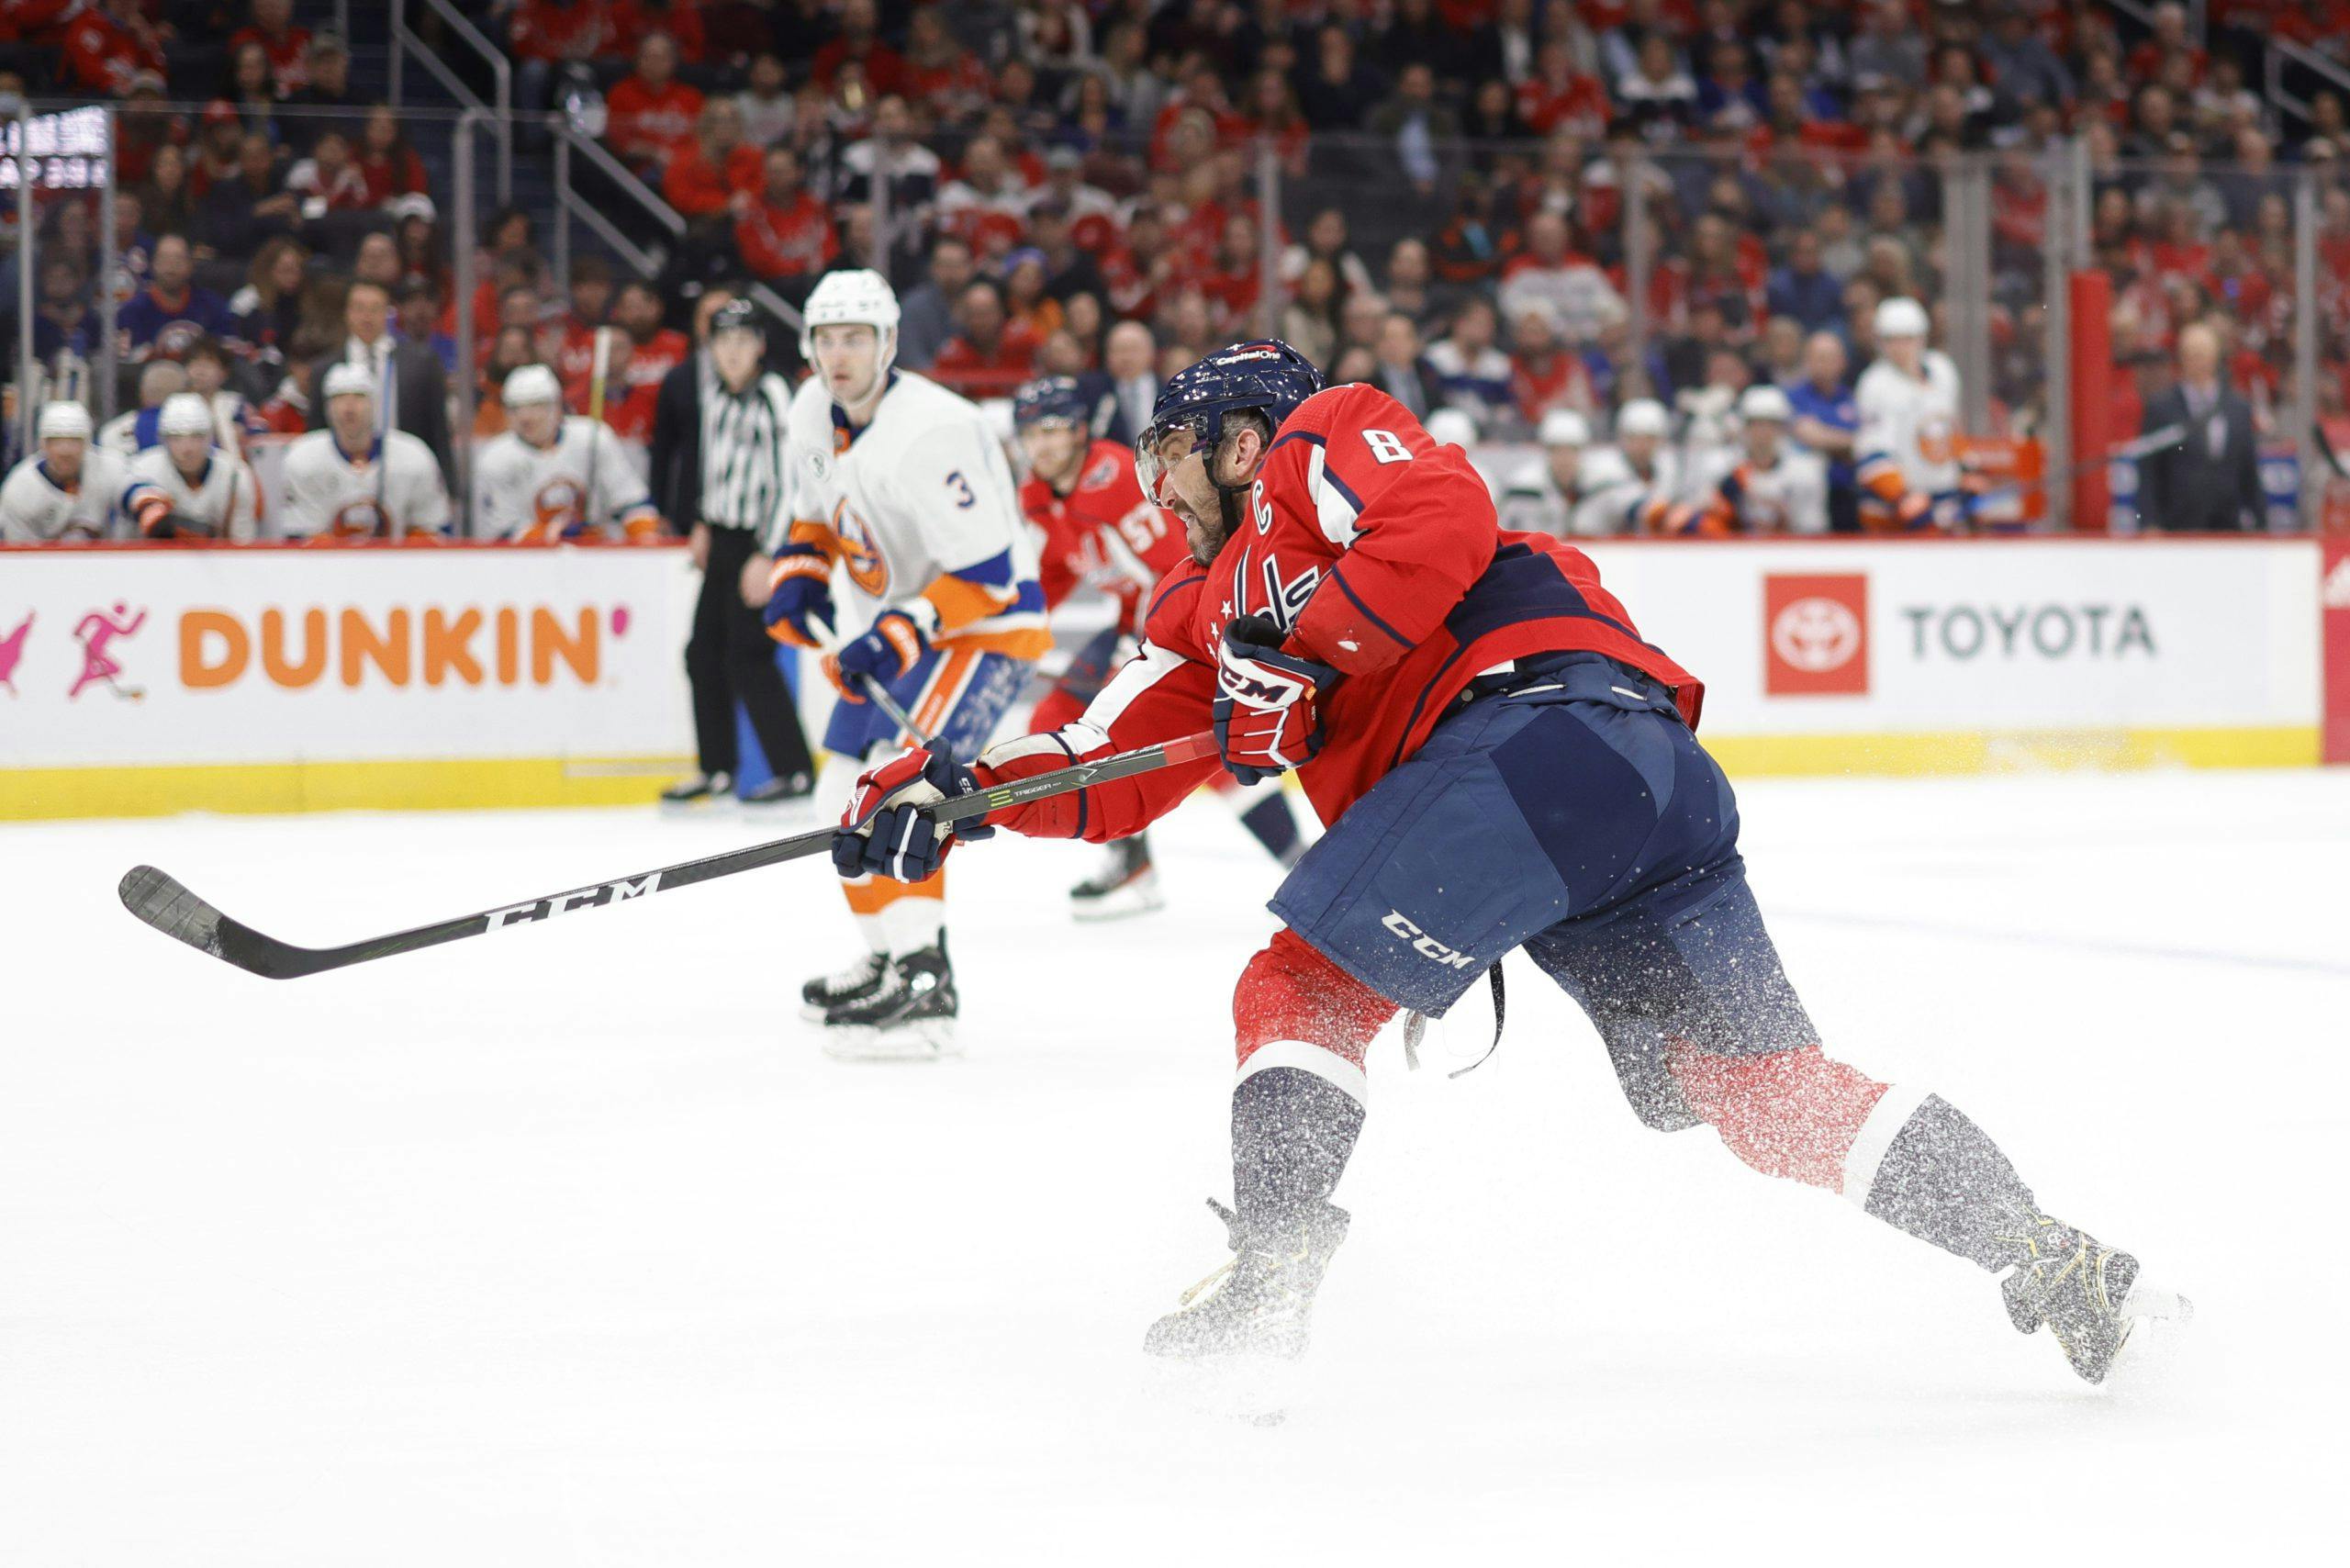 Alex Ovechkin playing some of the best hockey of his career ahead